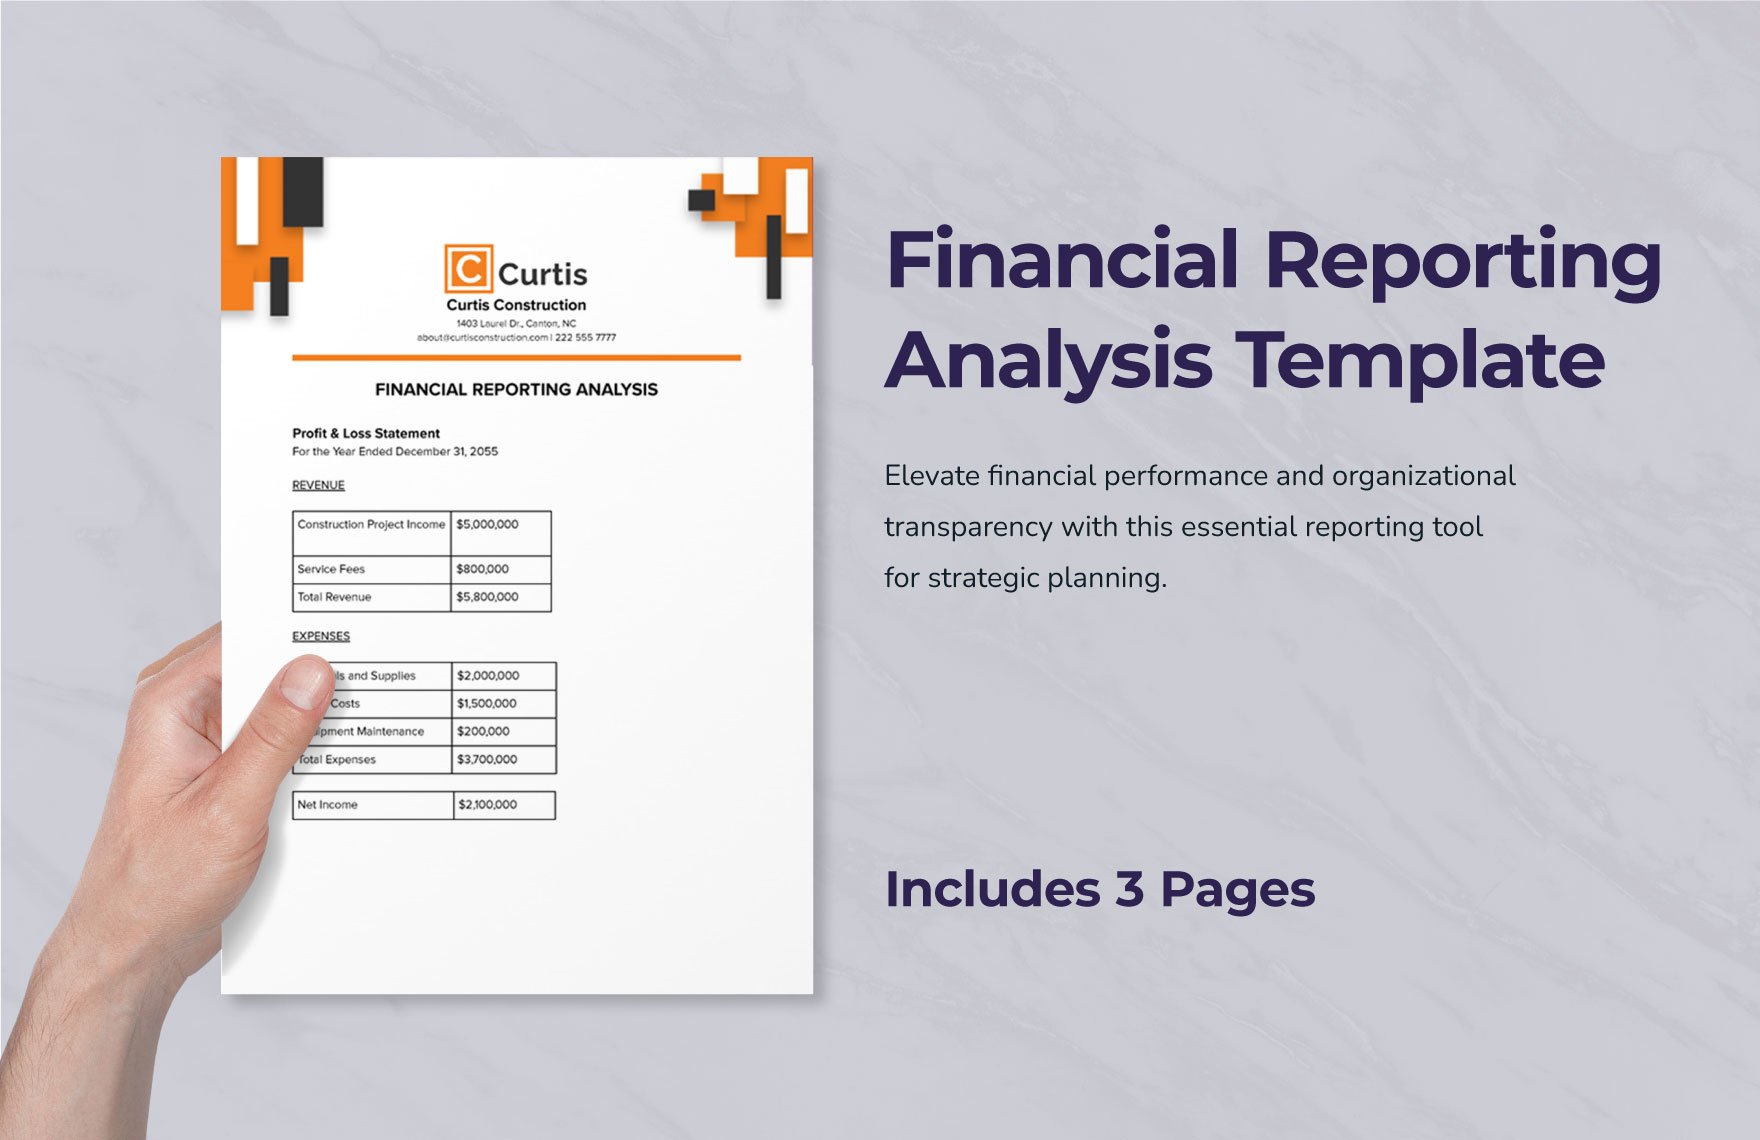  Financial Reporting Analysis Template